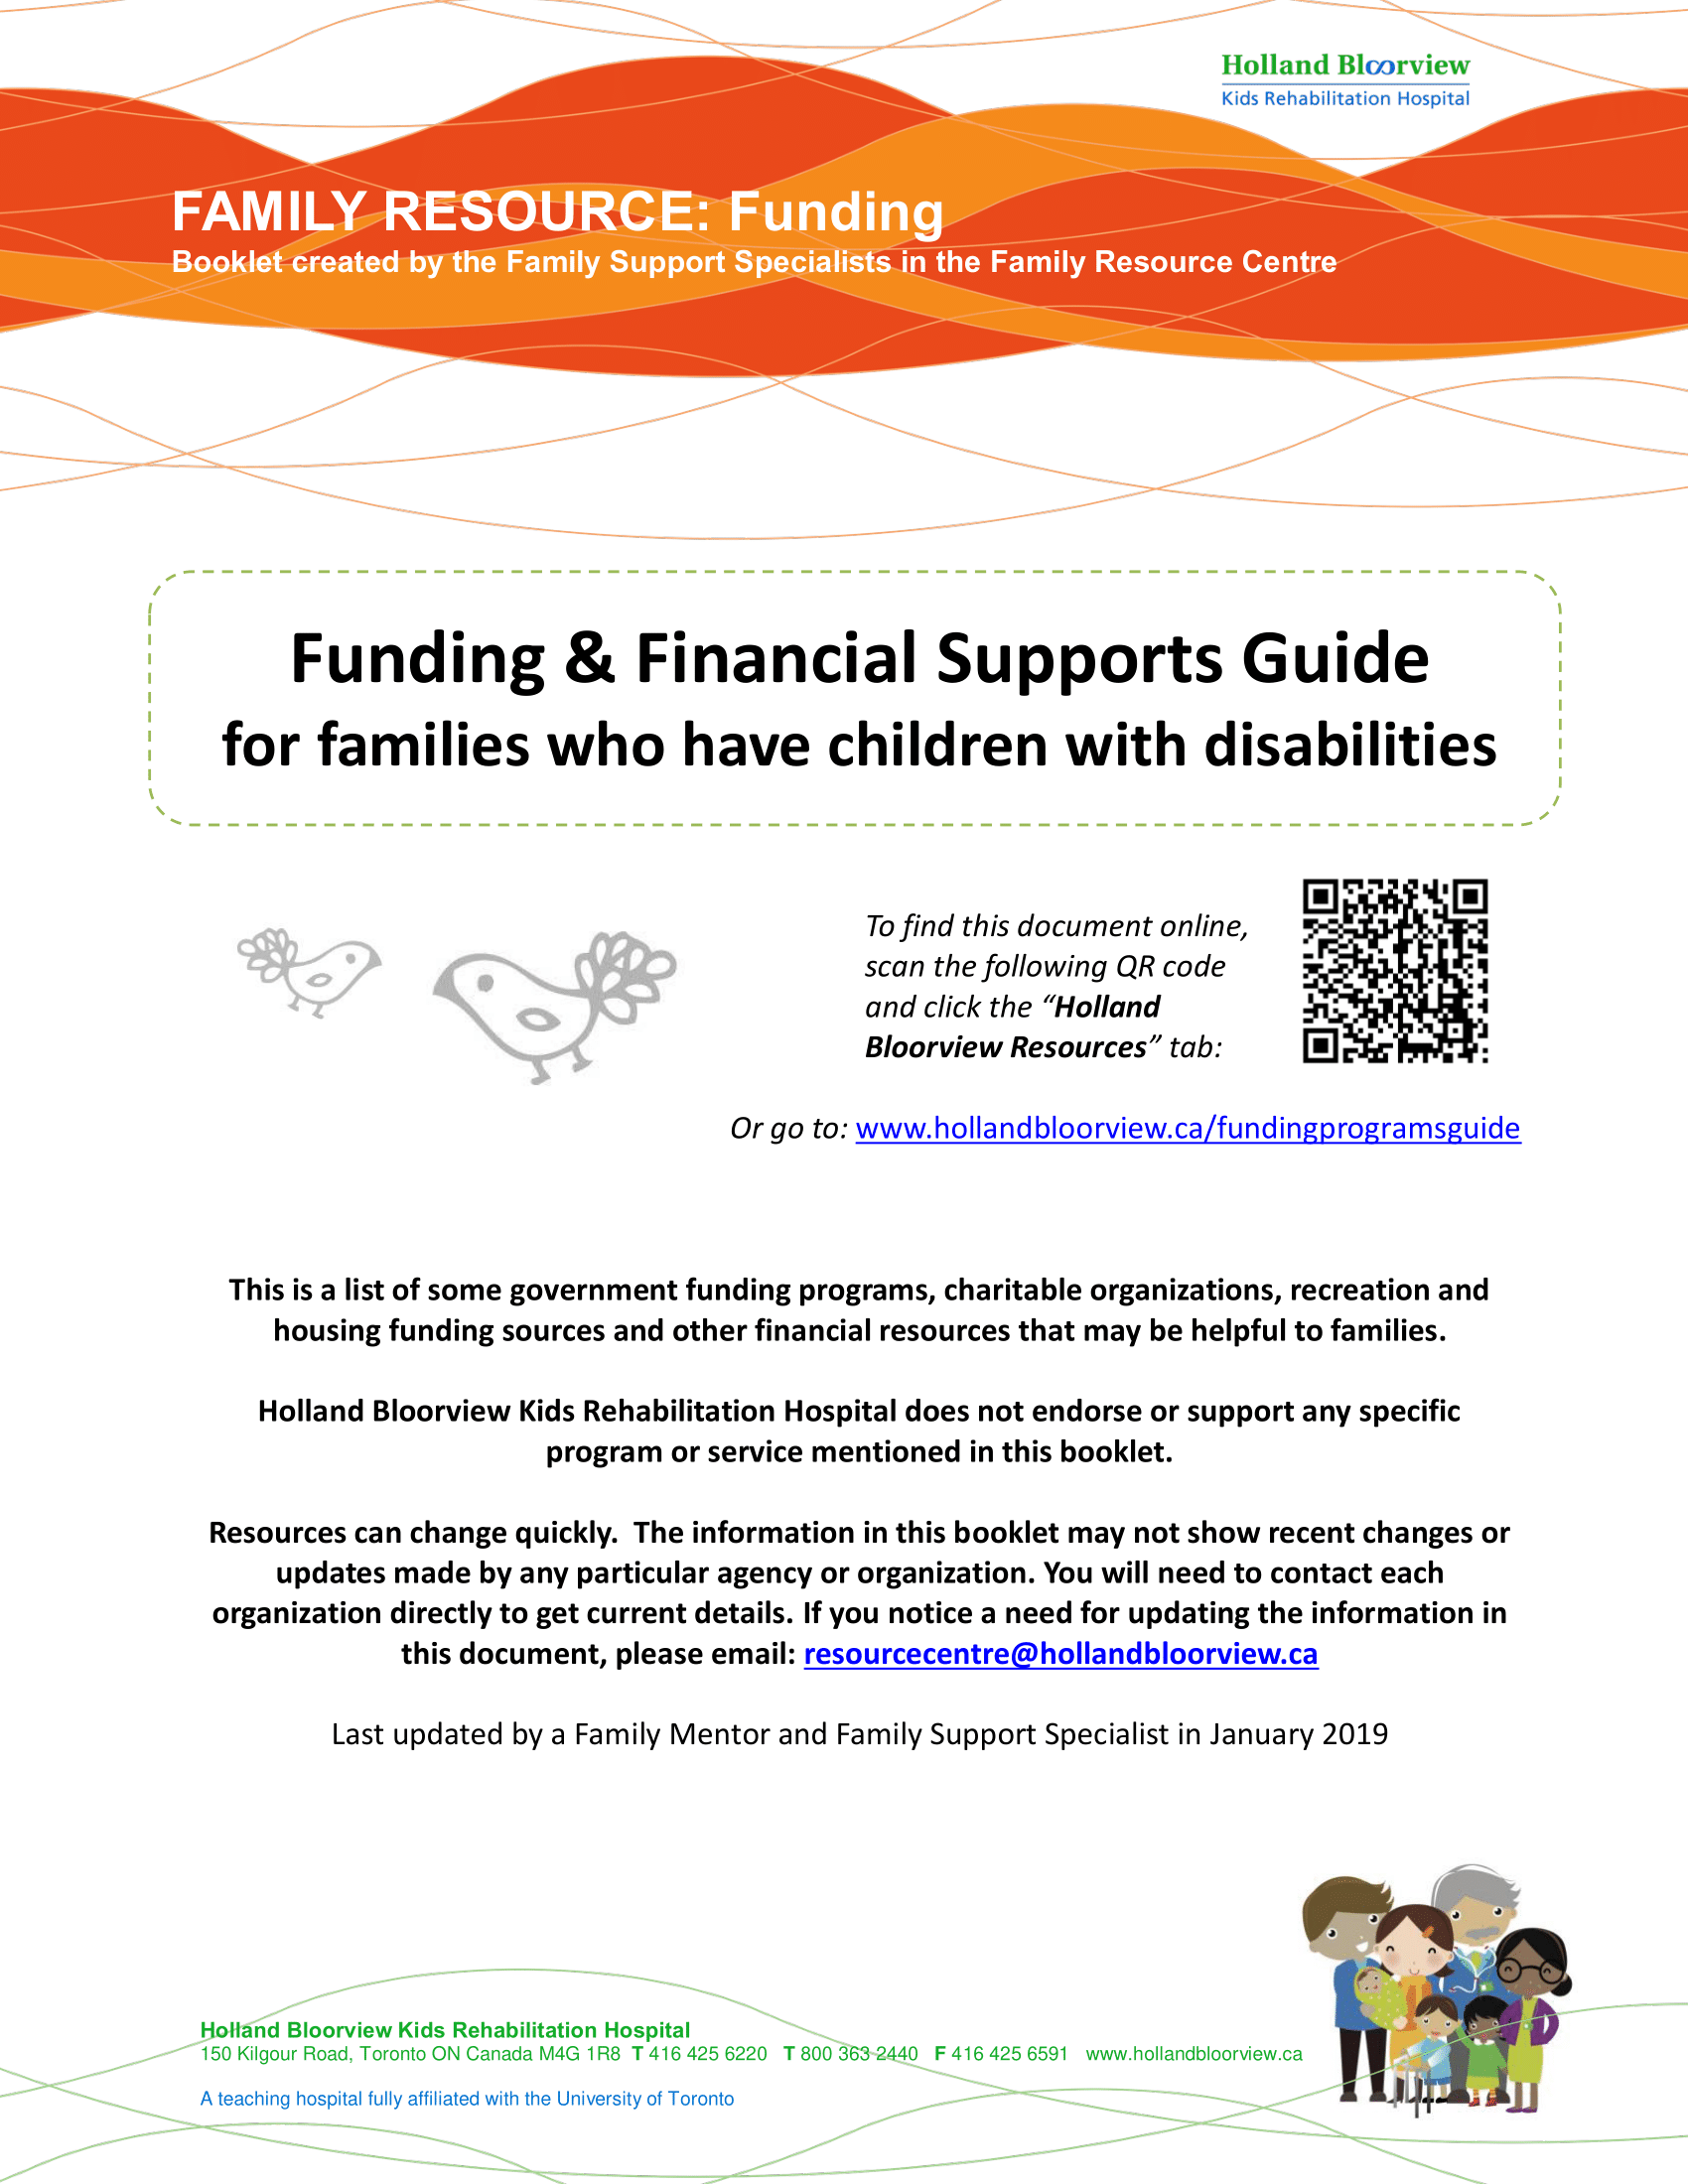 2019-01 Funding and Financial Supports Guide (1)-01